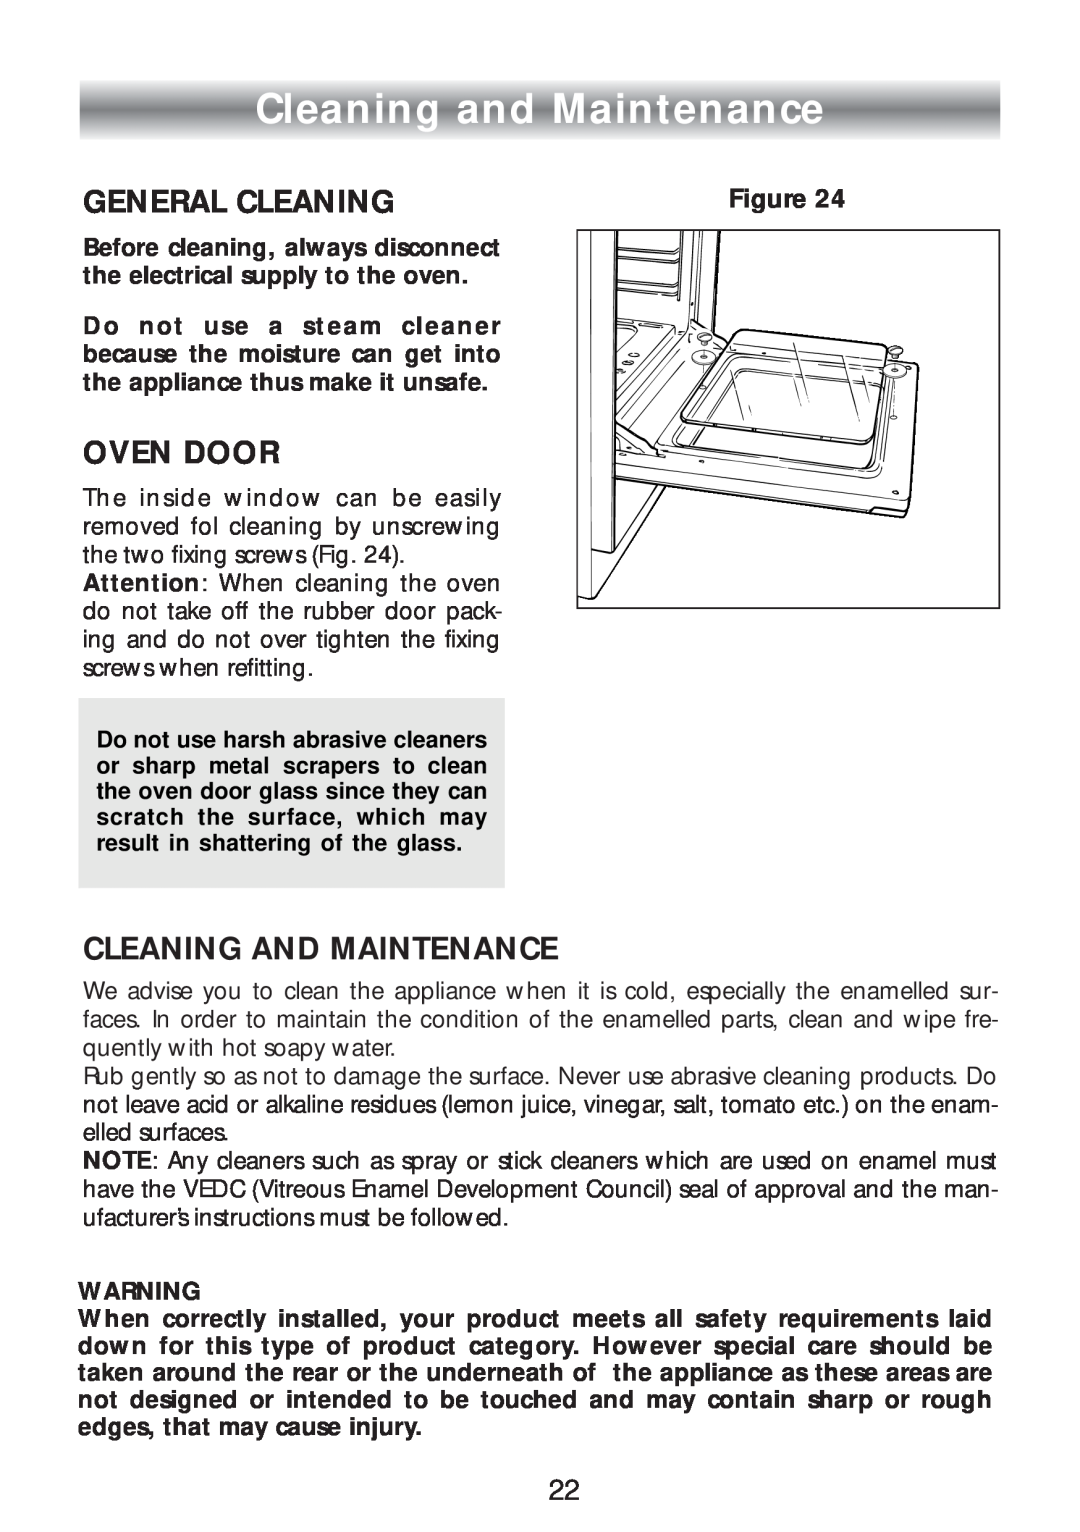 CDA SC309 manual Cleaning and Maintenance, General Cleaning, Oven Door, Cleaning And Maintenance 